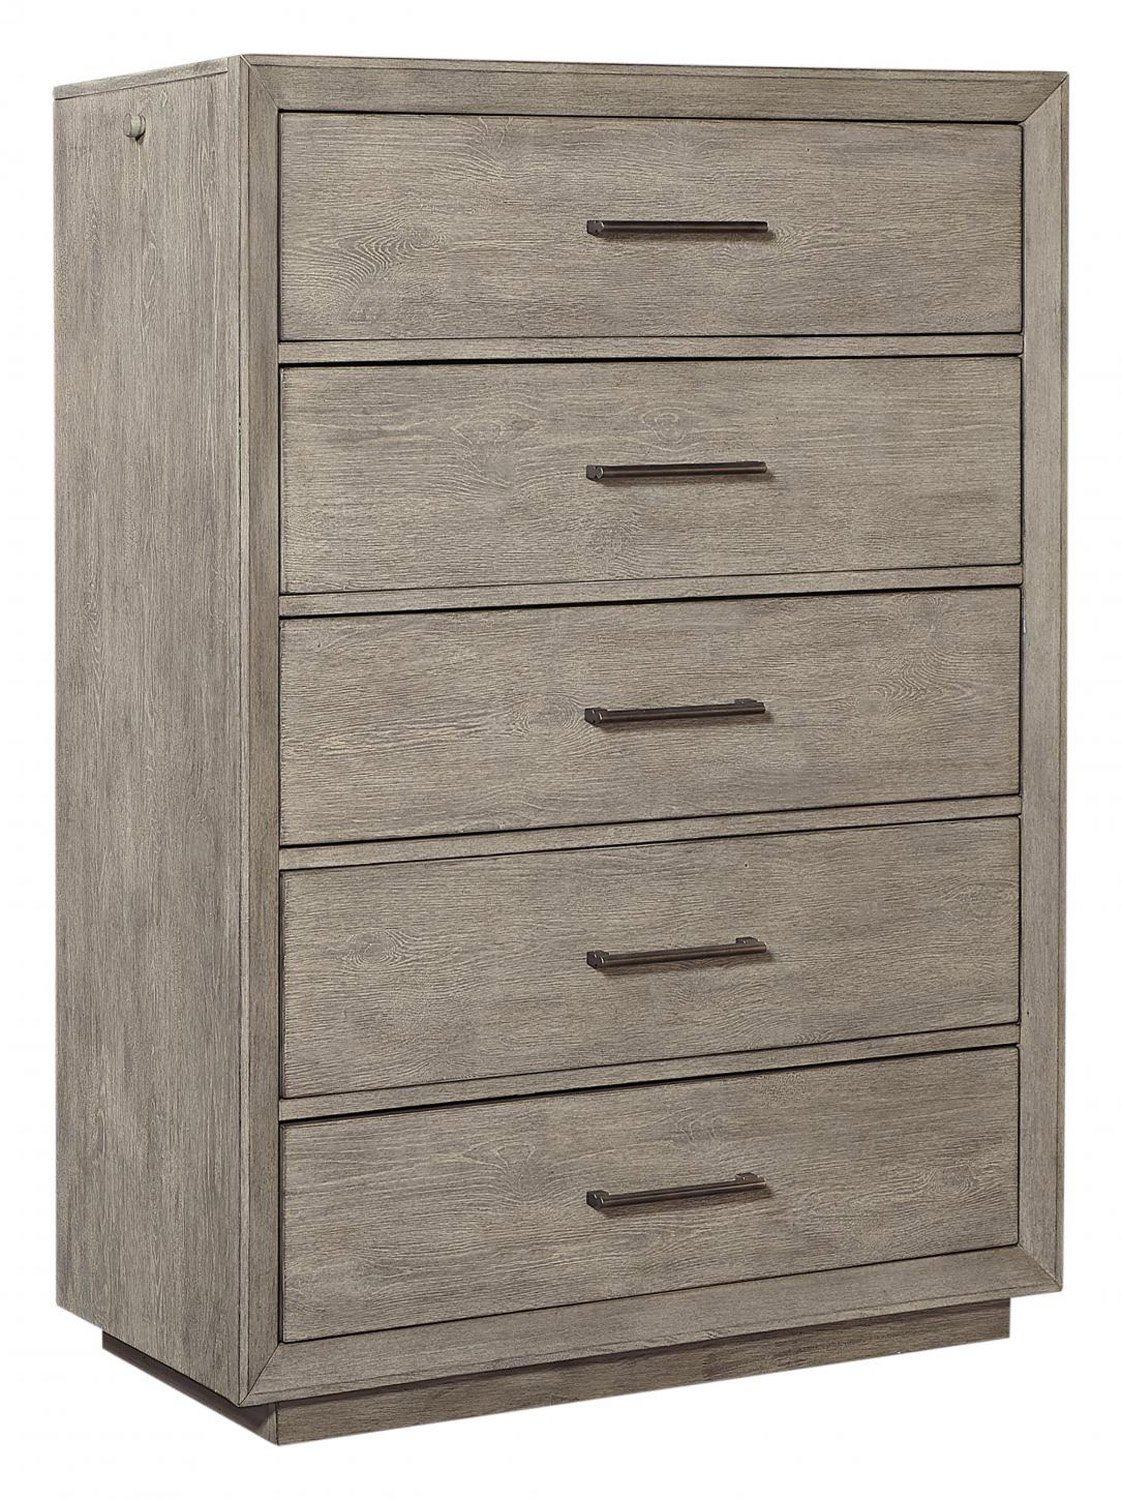 Platinum Chest in the Gray Linen finish